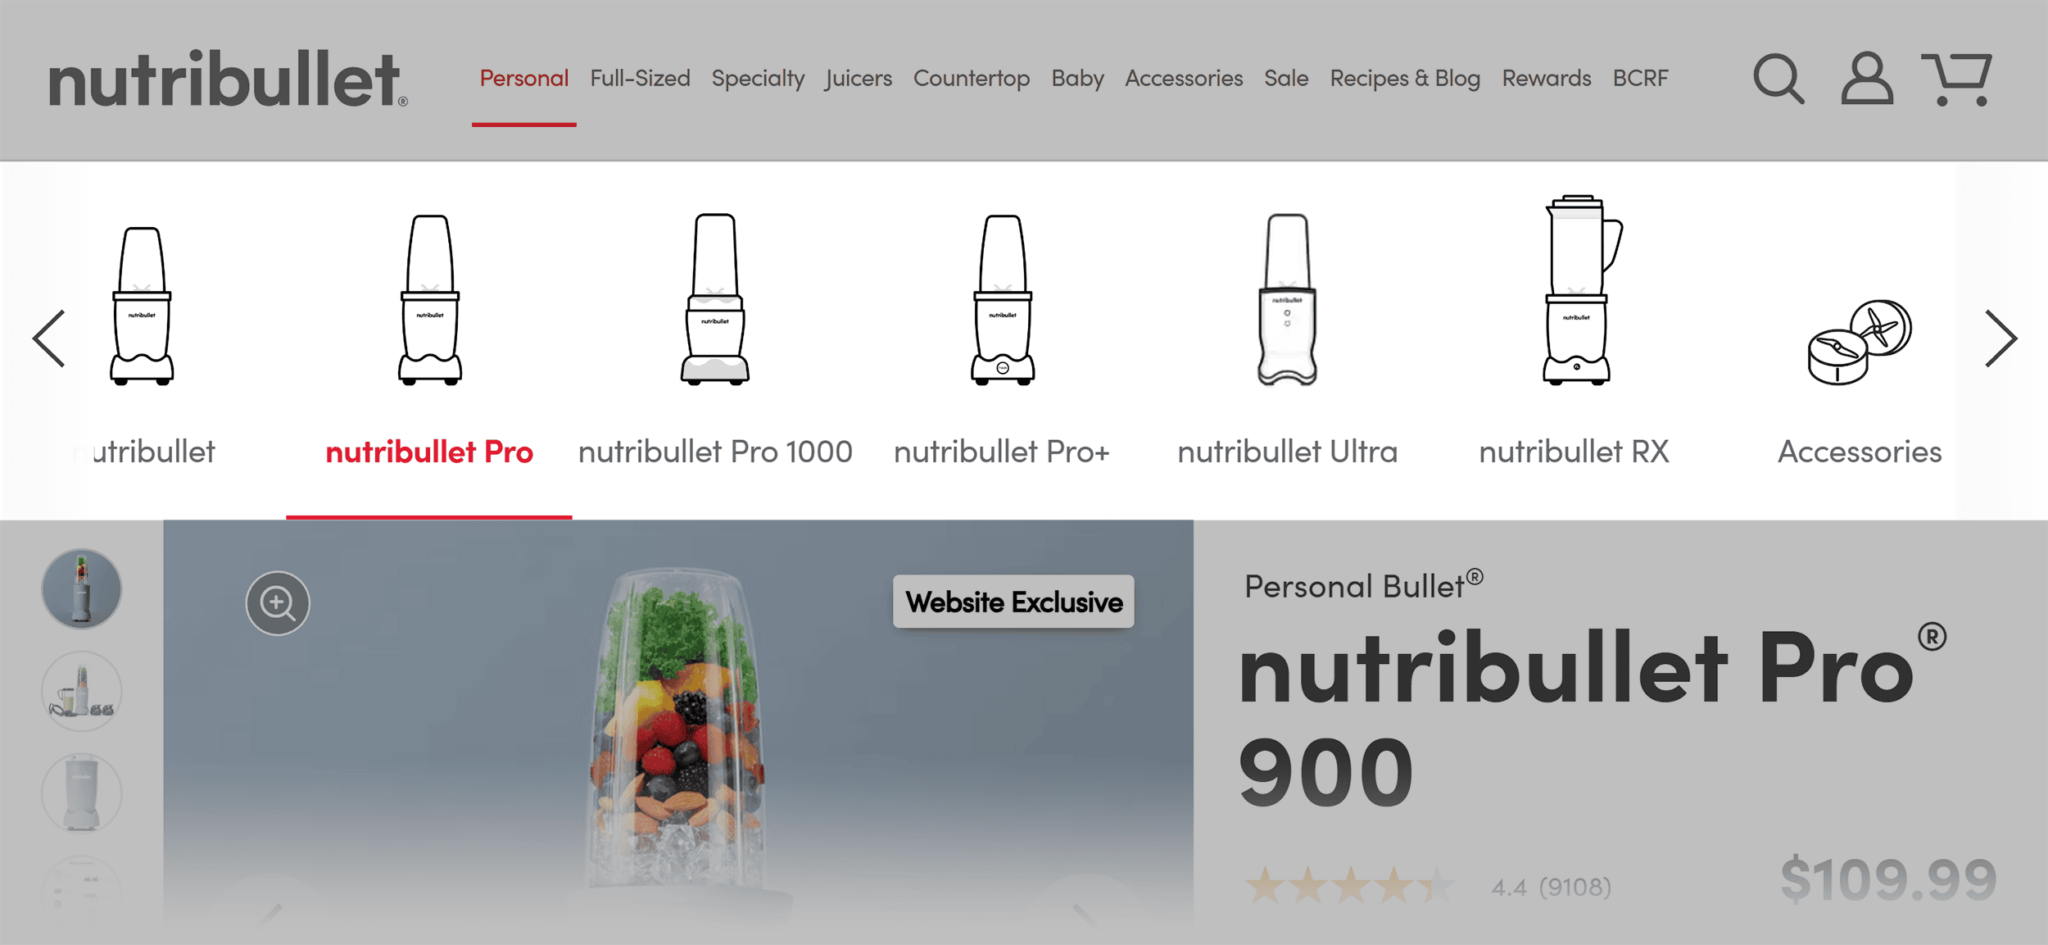 nutribullet-menu 20 Effective Product Page Examples (+ Best Practices)